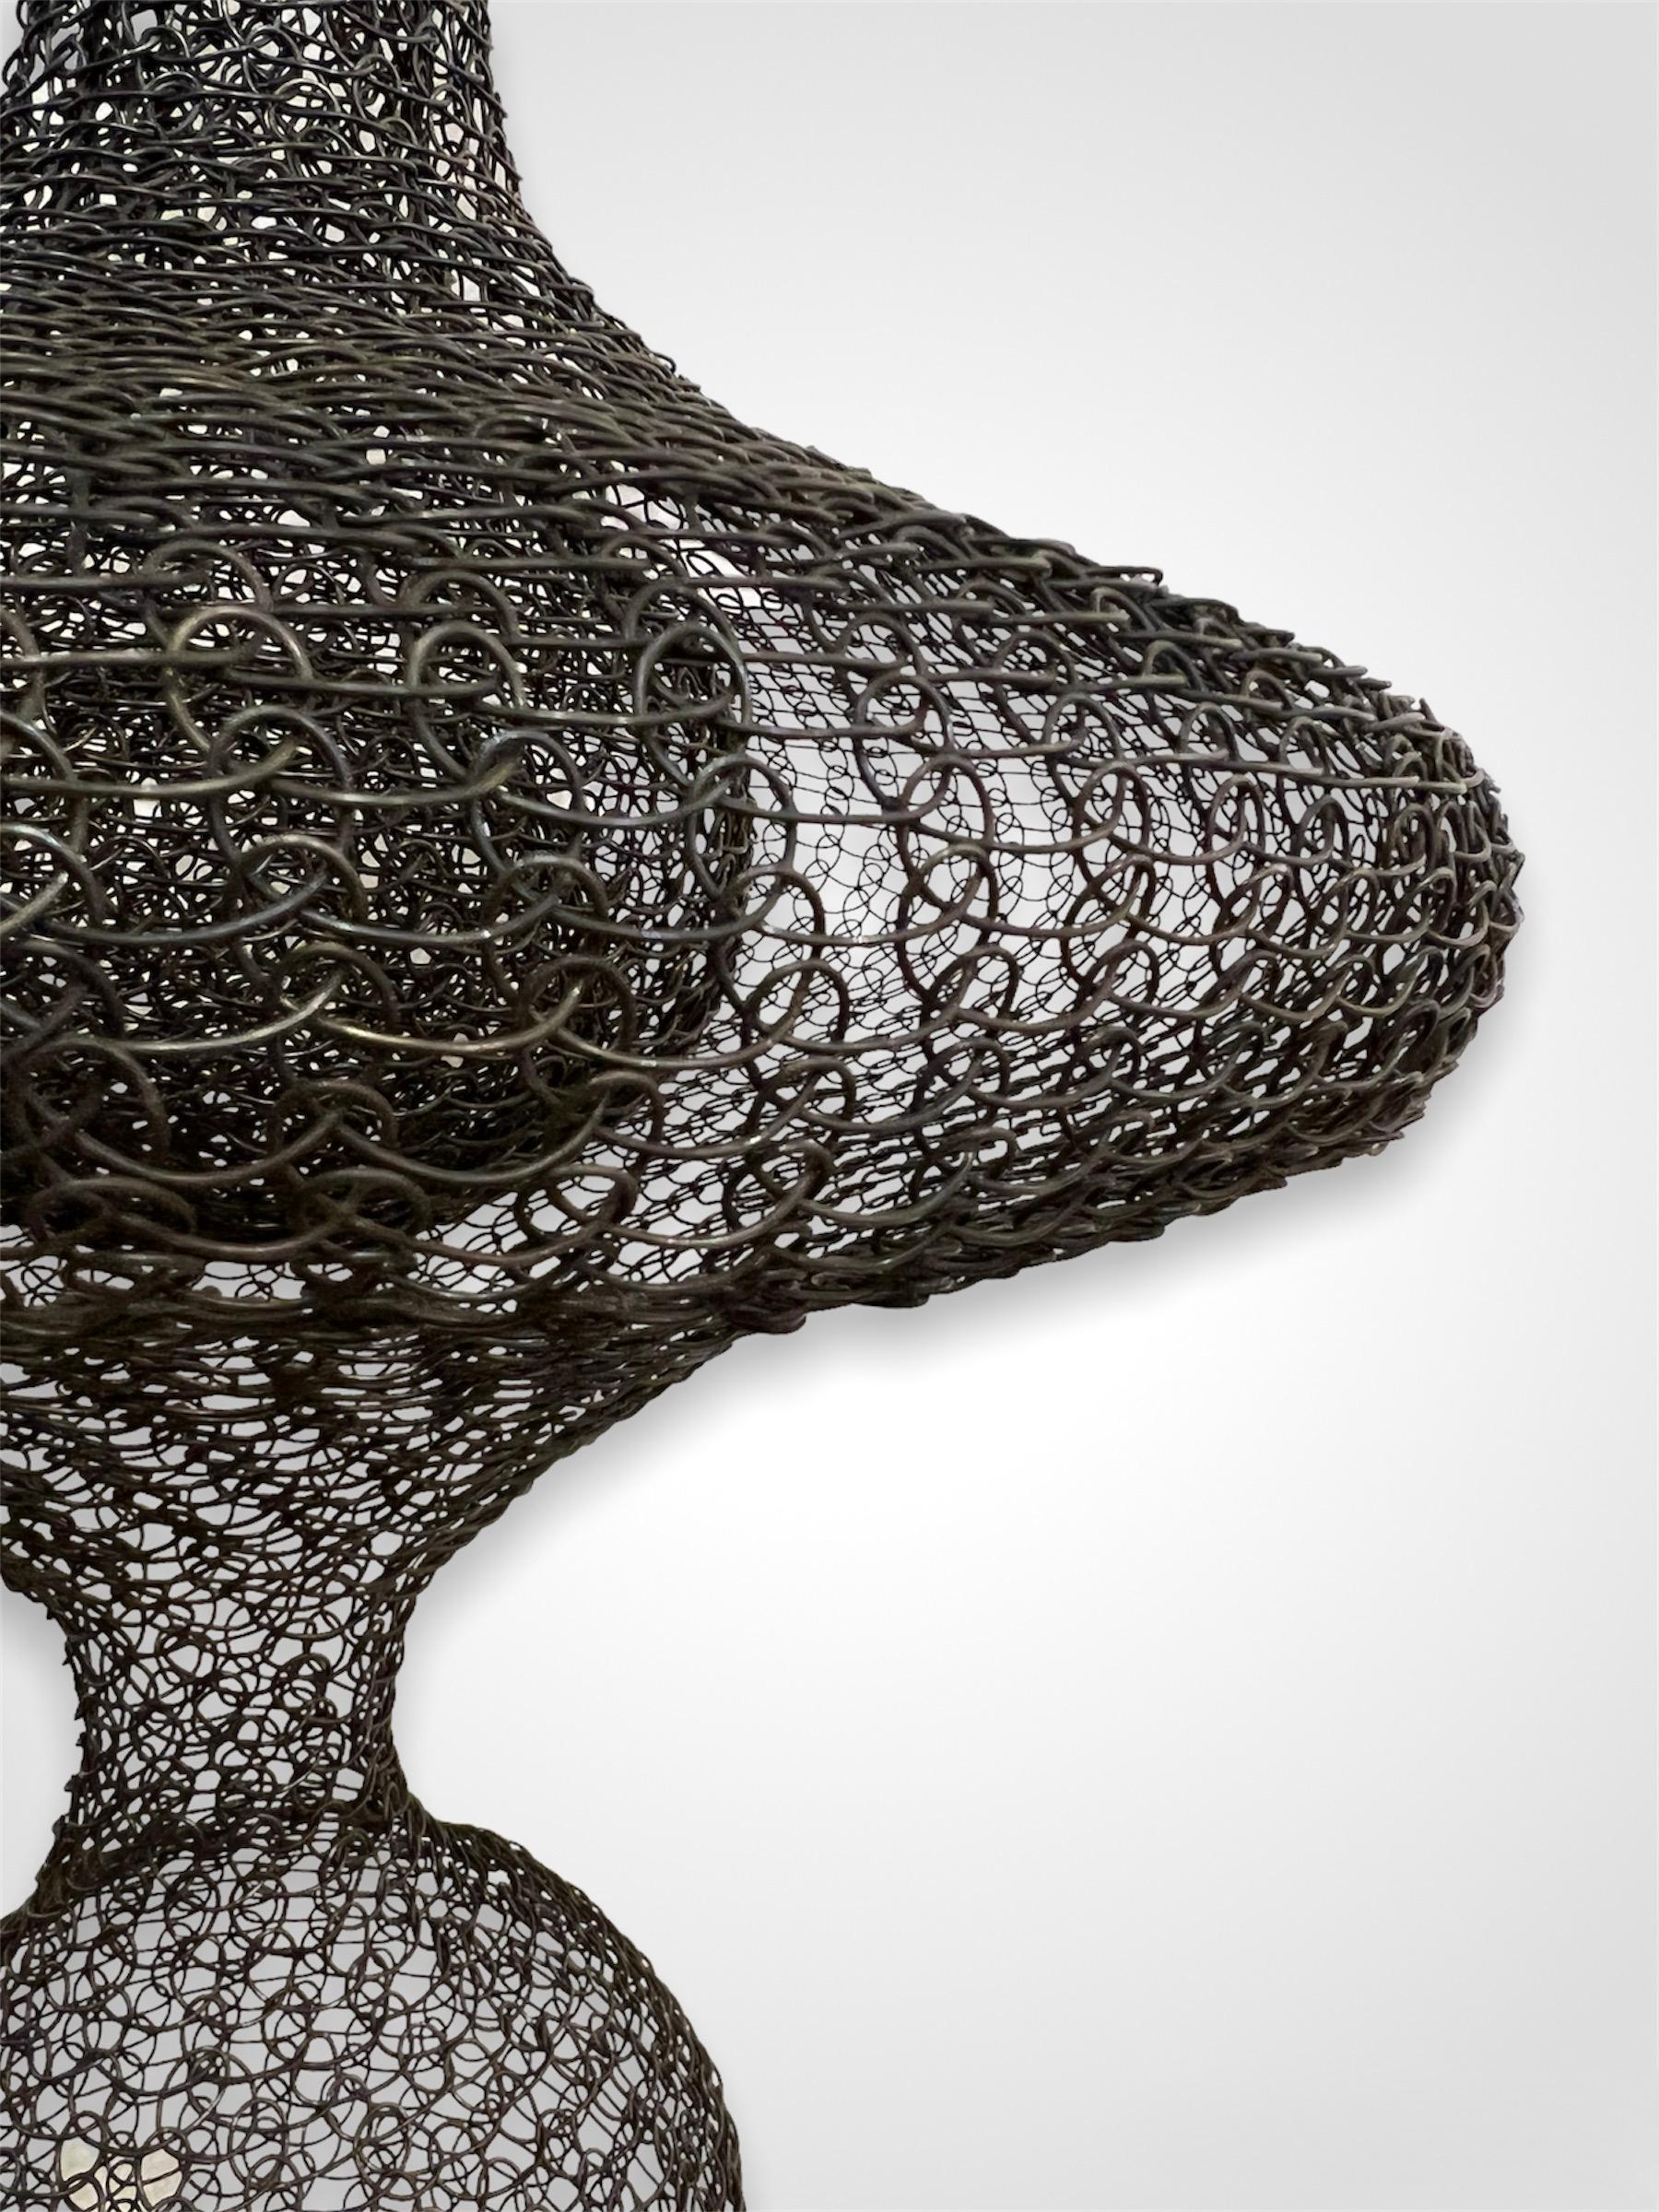 Organic Woven Mesh Wire Sculpture by Ulrikk Dufosse In Good Condition For Sale In New York, NY